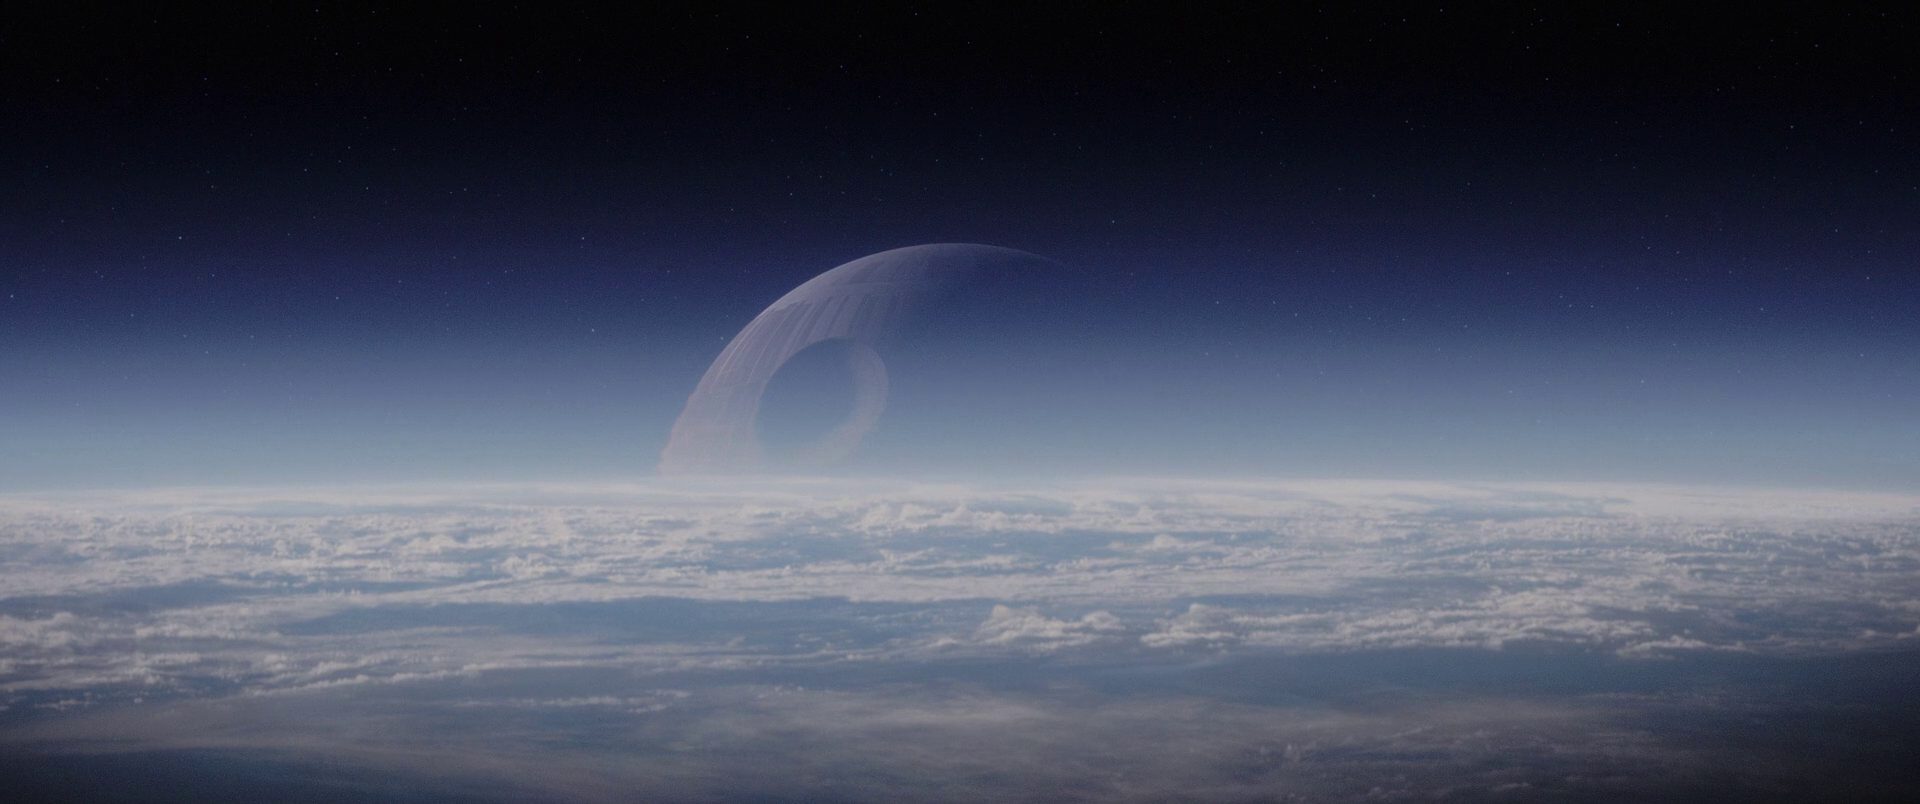 death star wallpaper,atmosphere,sky,atmospheric phenomenon,outer space,space